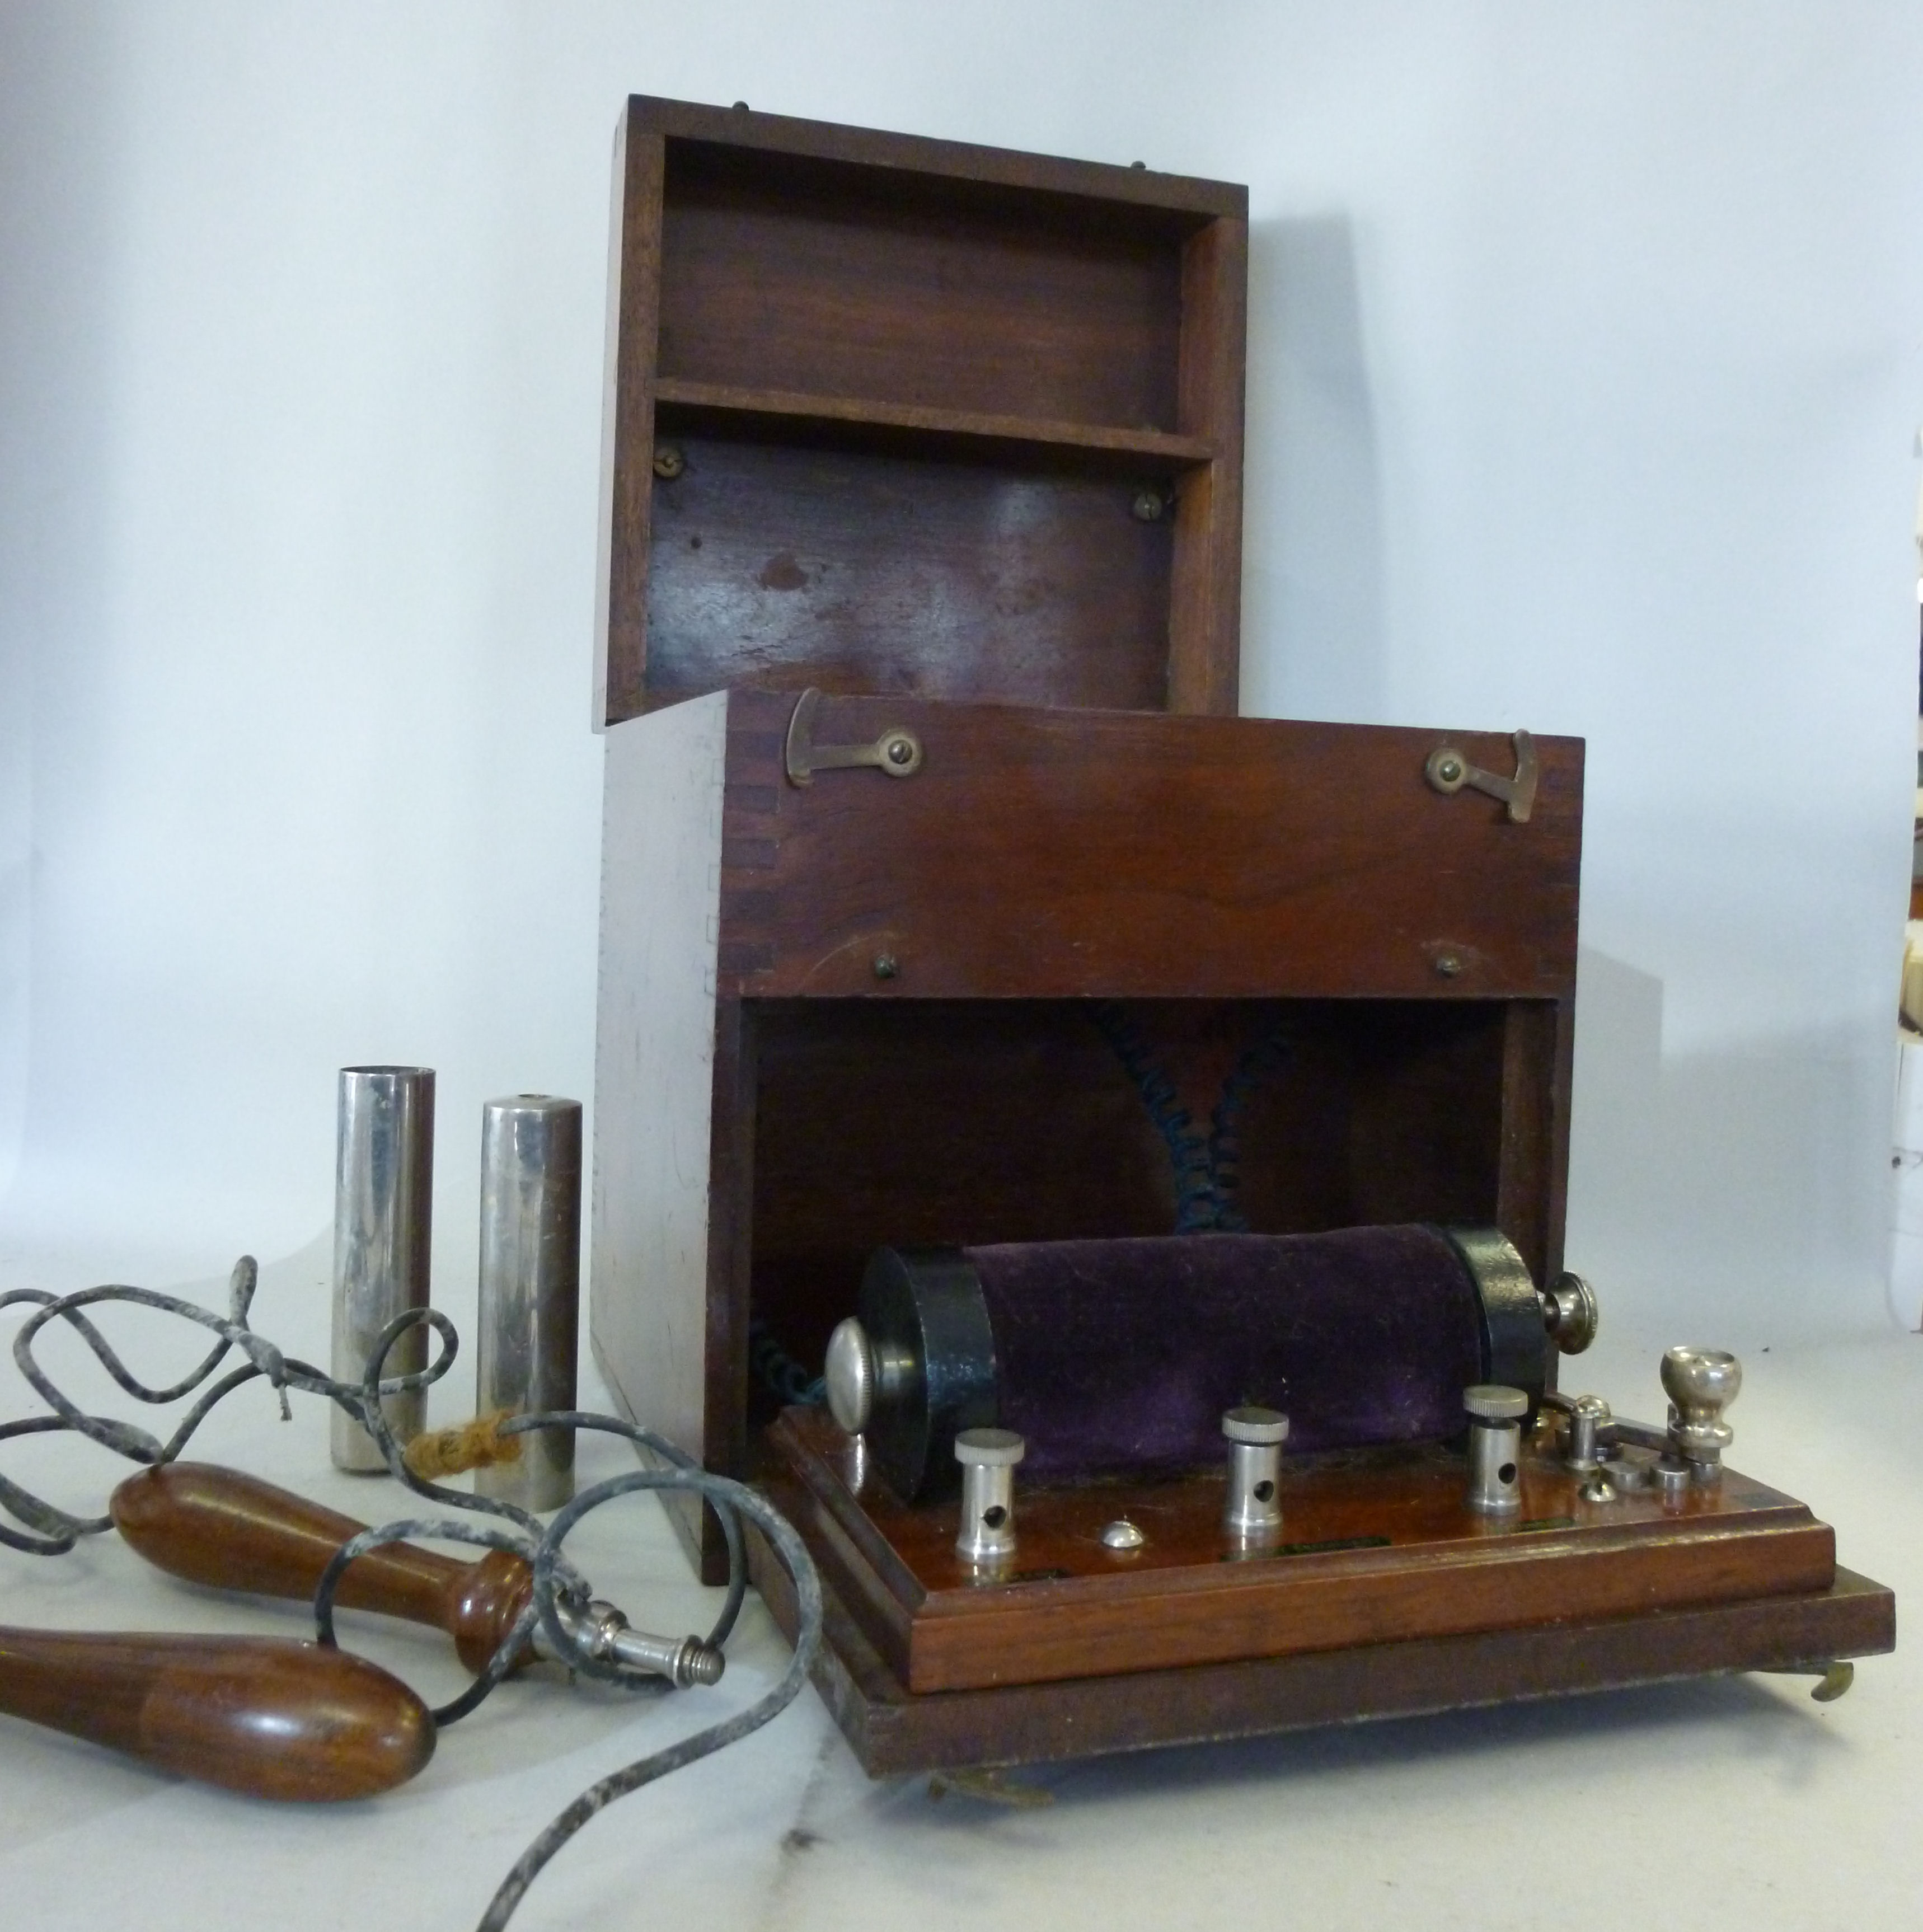 An early 20thC electric shock machine, i